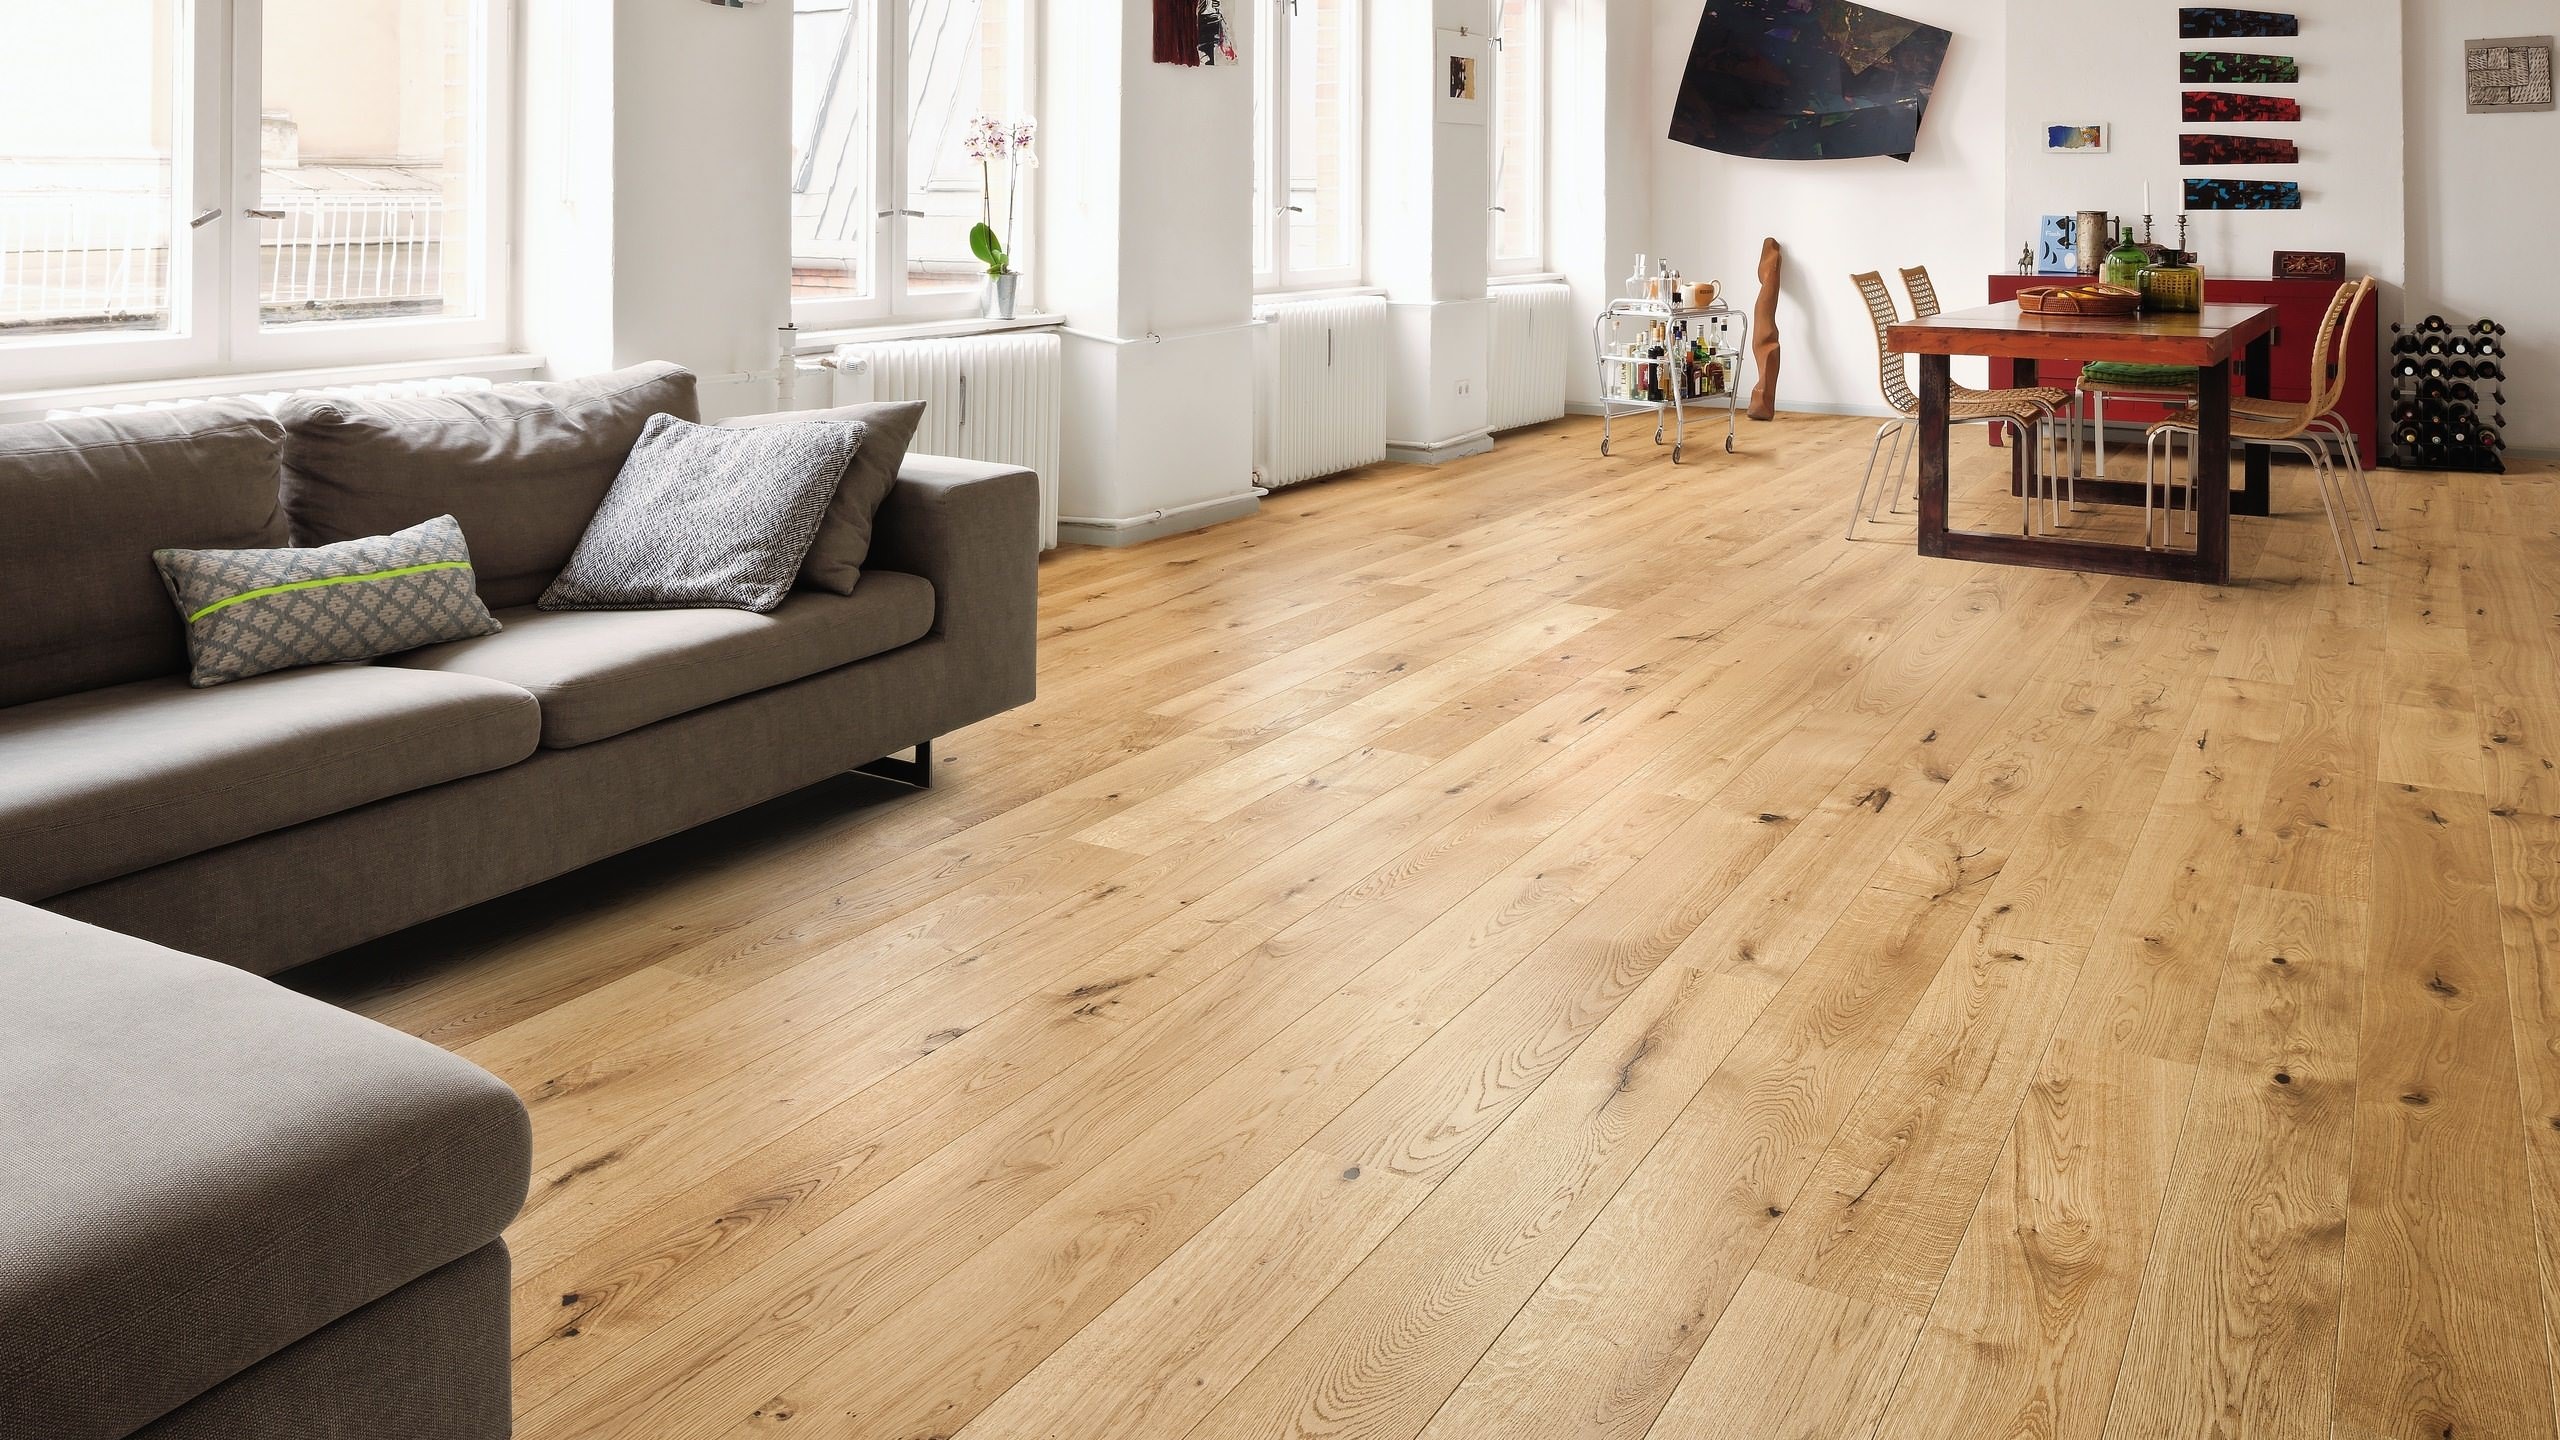 HARO PARQUET 4000 Plank 1-Strip 180 2V Oak Sauvage brushed permaDur Top Connect